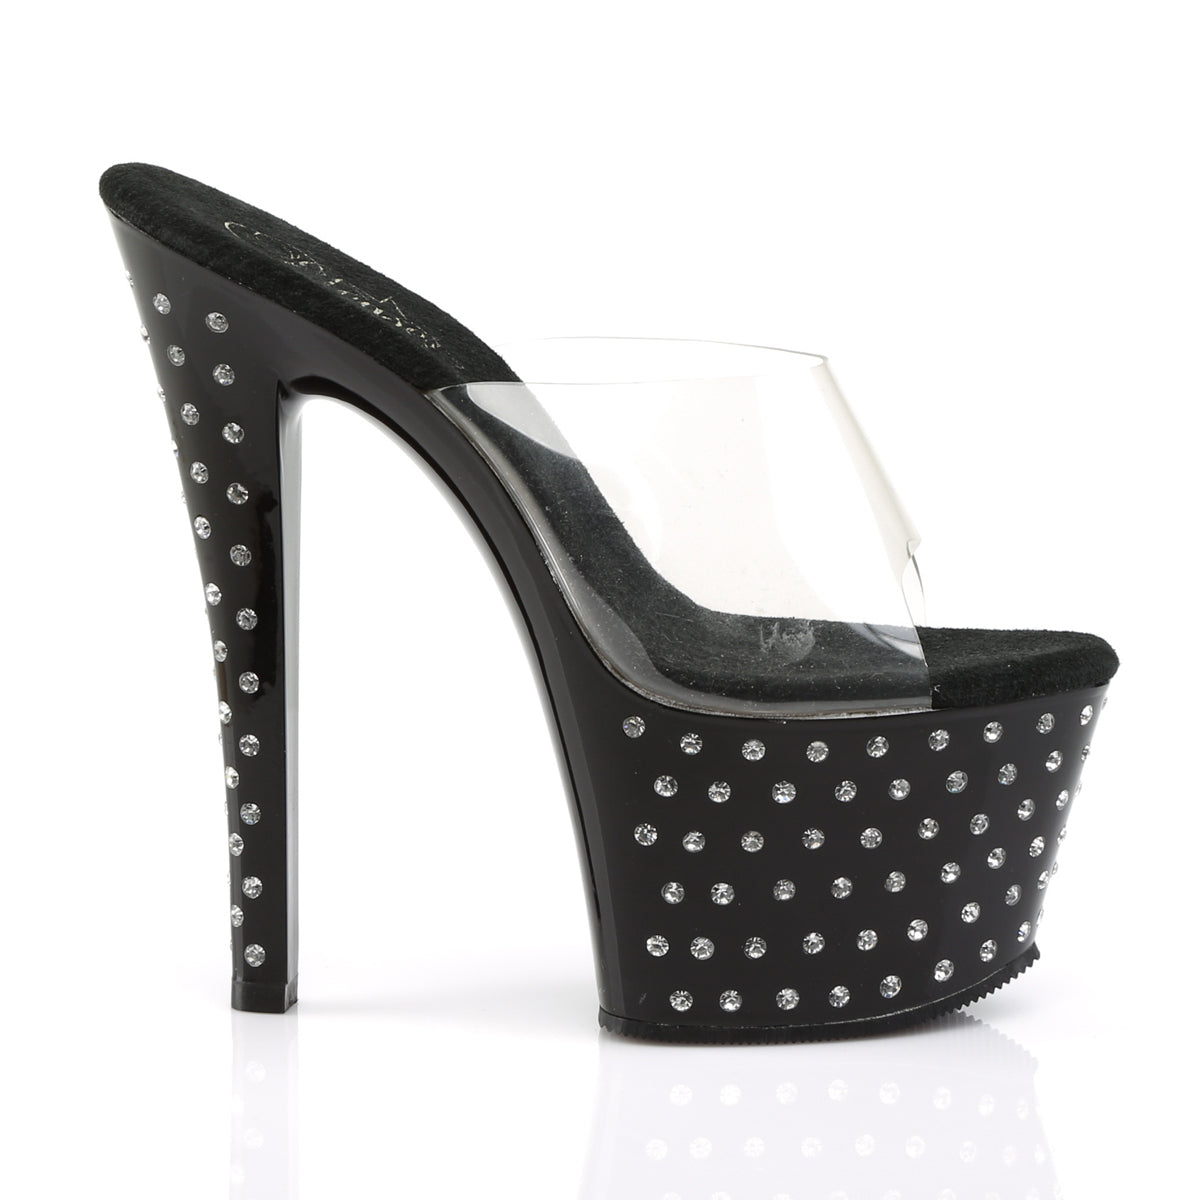 STARDUST-701 7" Heel Clear and Black Pole Dancing Platforms-Pleaser- Sexy Shoes Fetish Heels